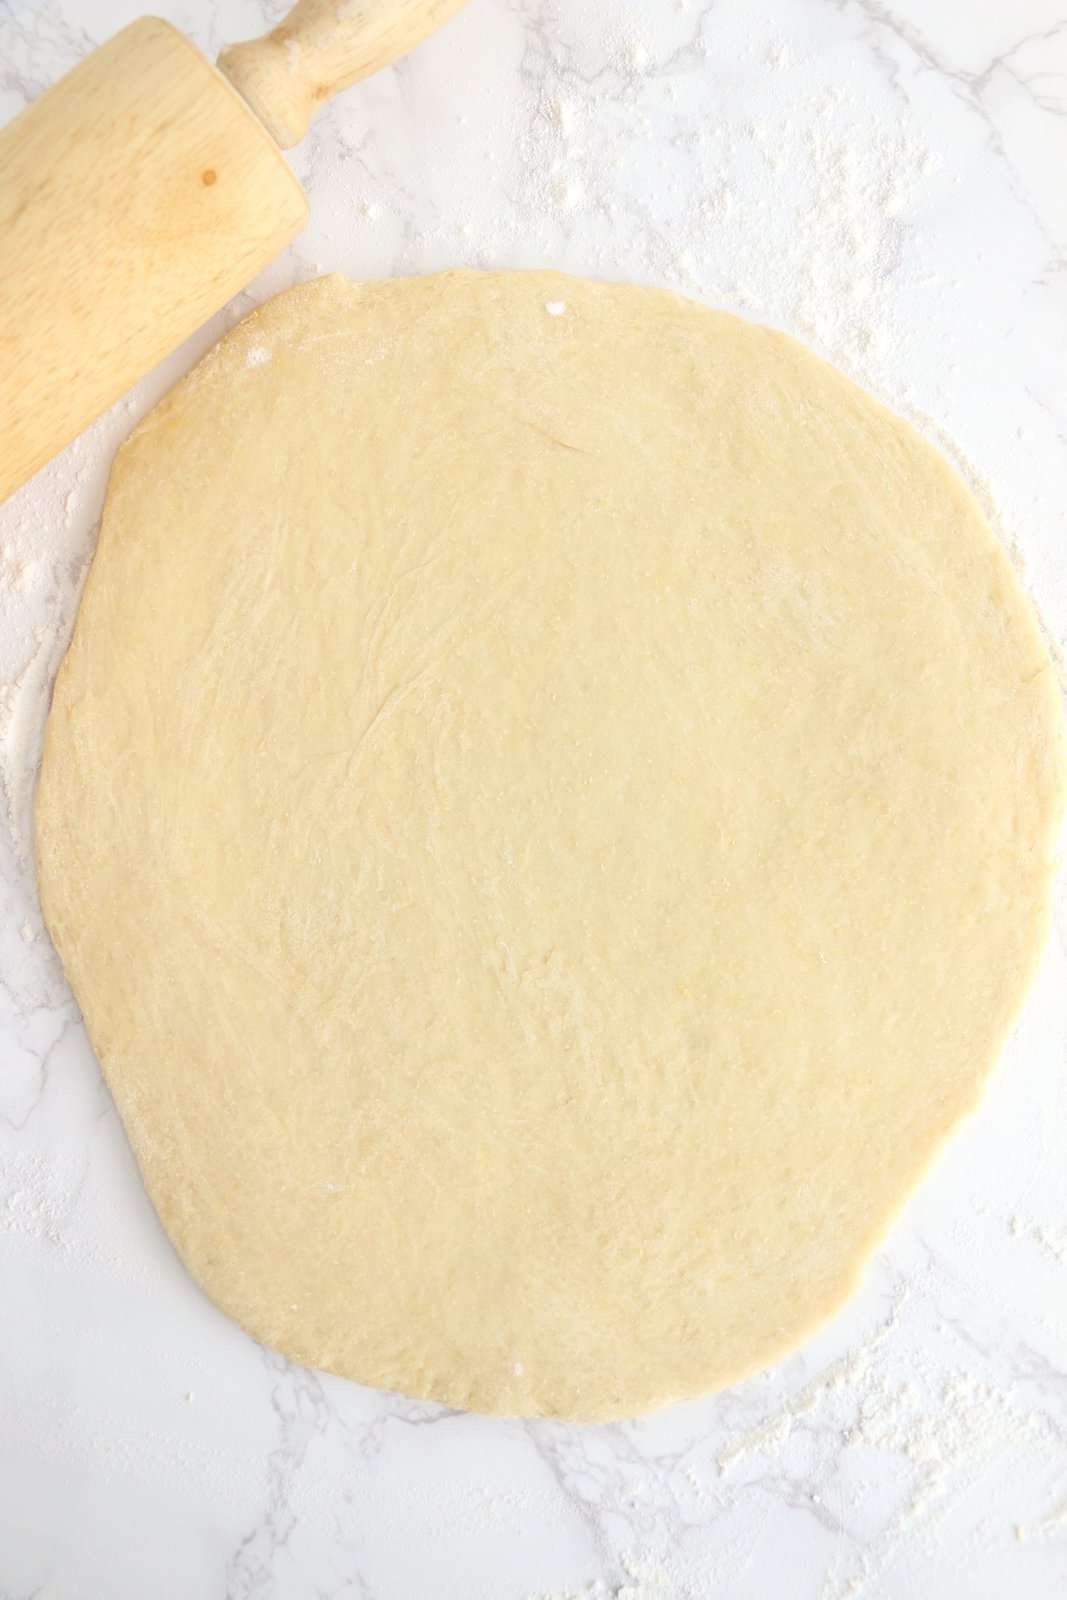 Dough rolled out on hard surface.